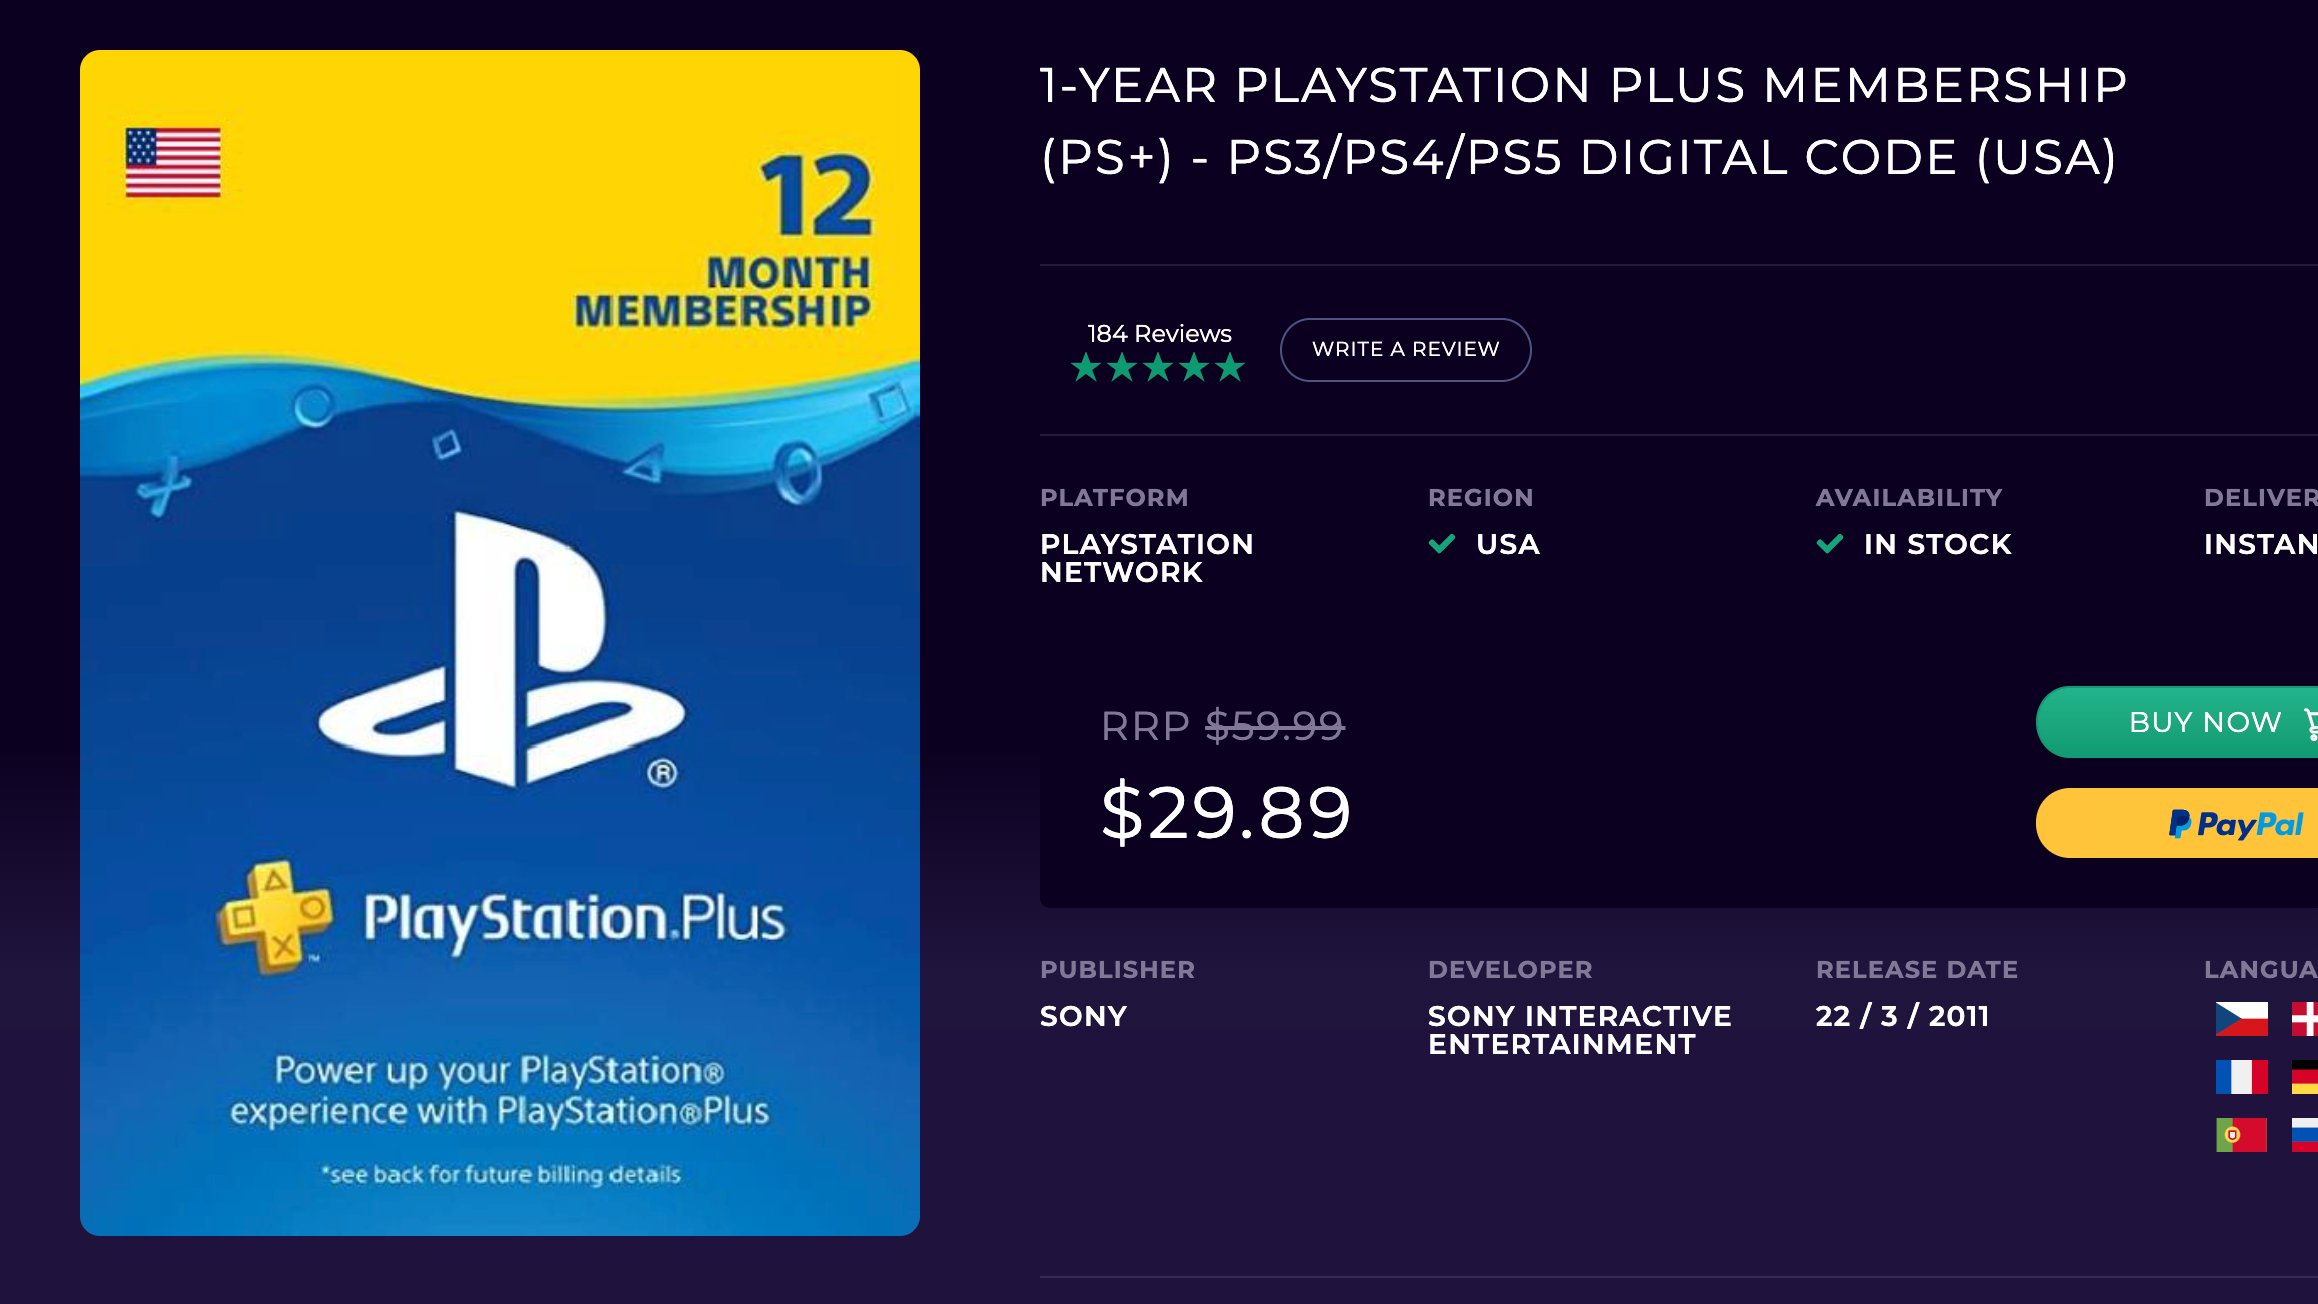 Sole Retriever on "DEAL 1-Year of PlayStation Plus for $29.89 ✓ Codes stack (buy as many as you want) ✓ Codes never expire ✓ CDKeys is legit https://t.co/CGhBHUeDLX https://t.co/8QWXOapZAj" /